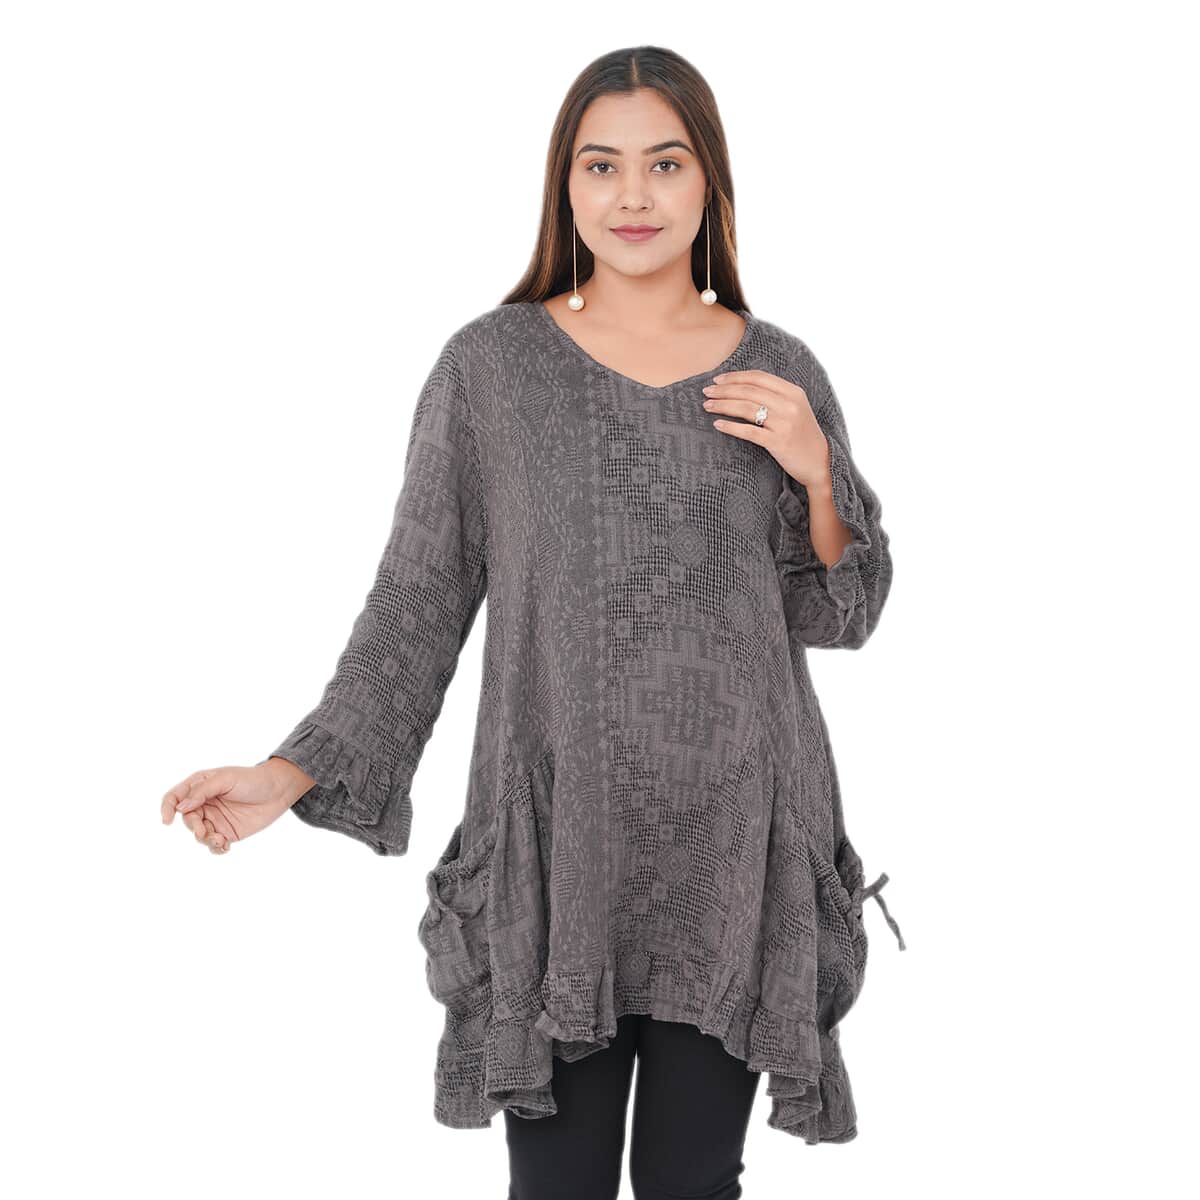 Tamsy Gray 100% Cotton Double Layer Jacquard Ruffle Hem Top - XL/XXL image number 2